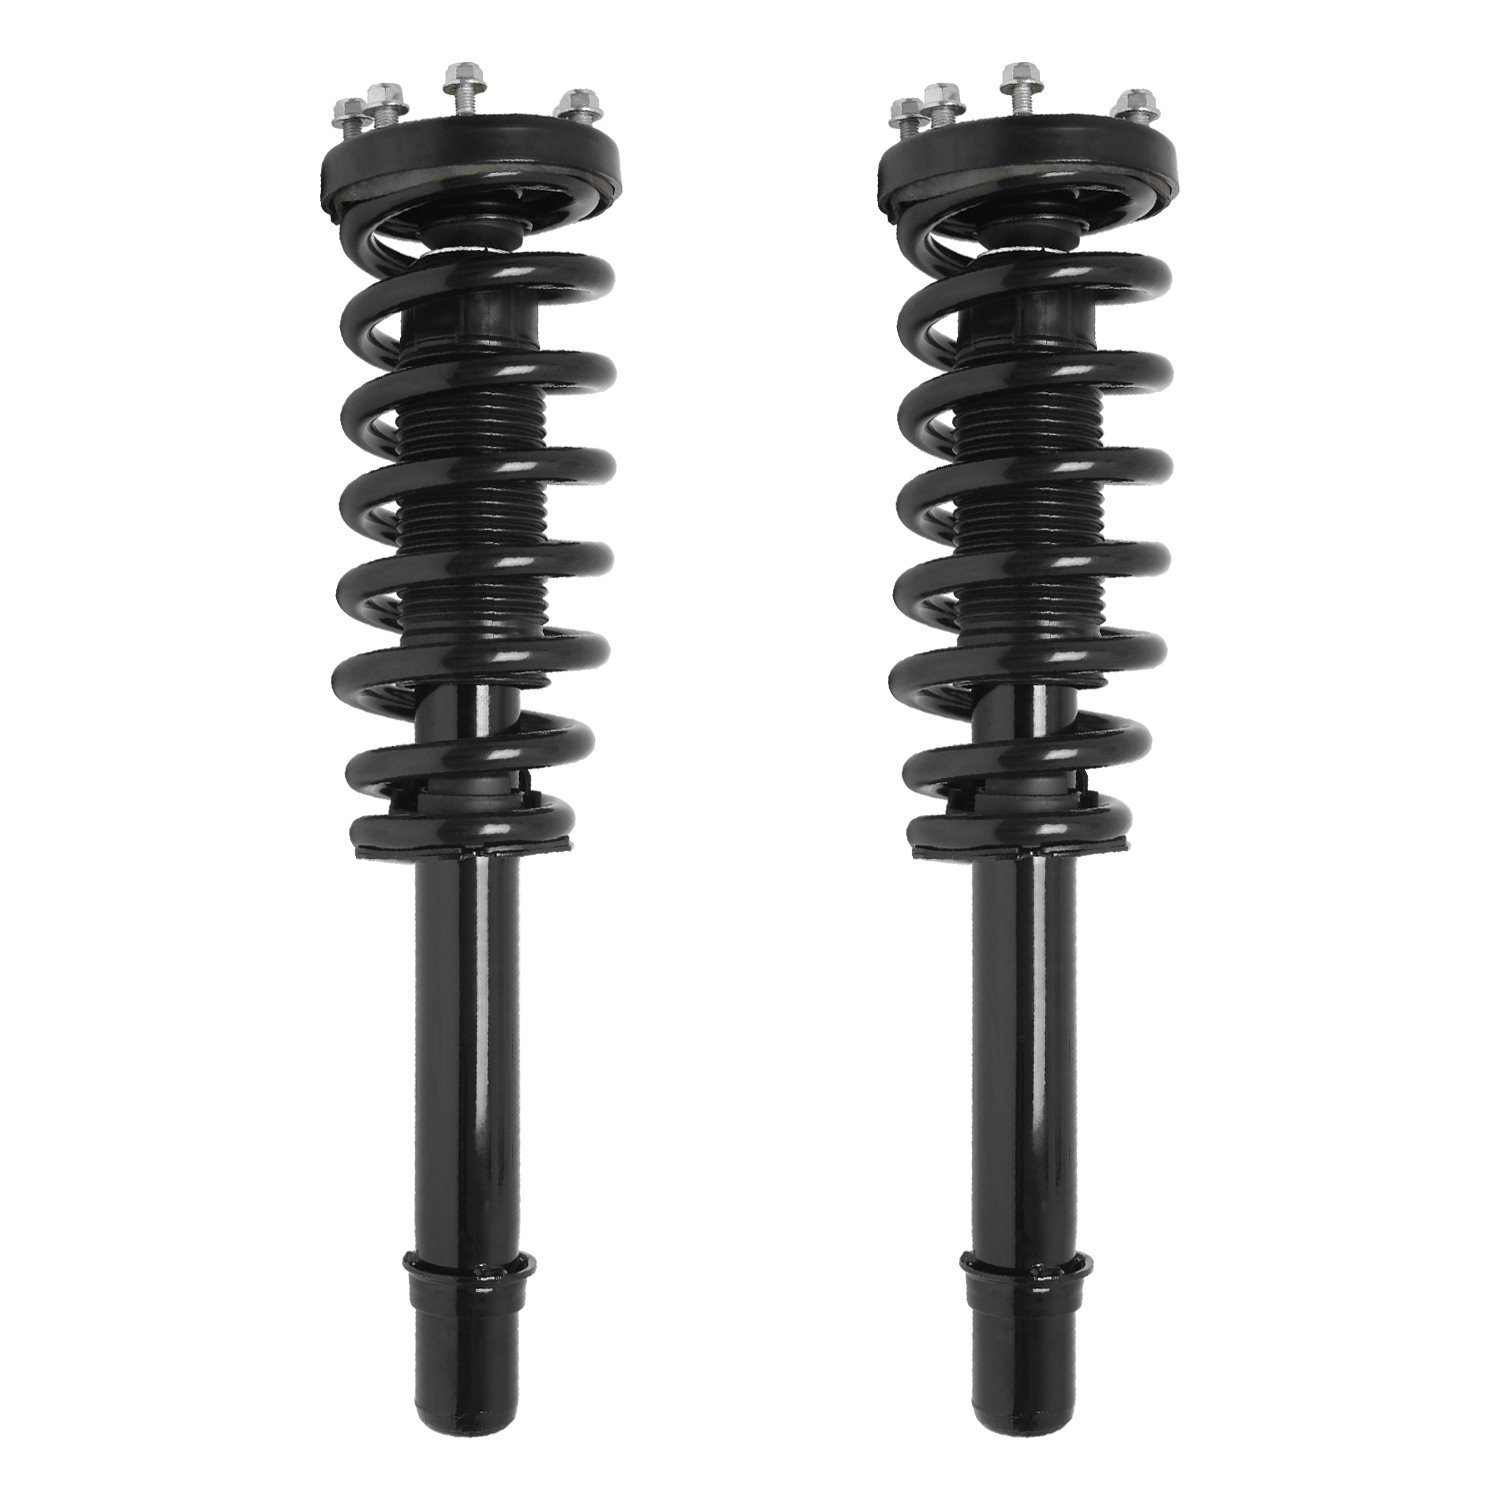 2-11940-001 Suspension Strut & Coil Spring Assembly Set Fits Select Acura TL